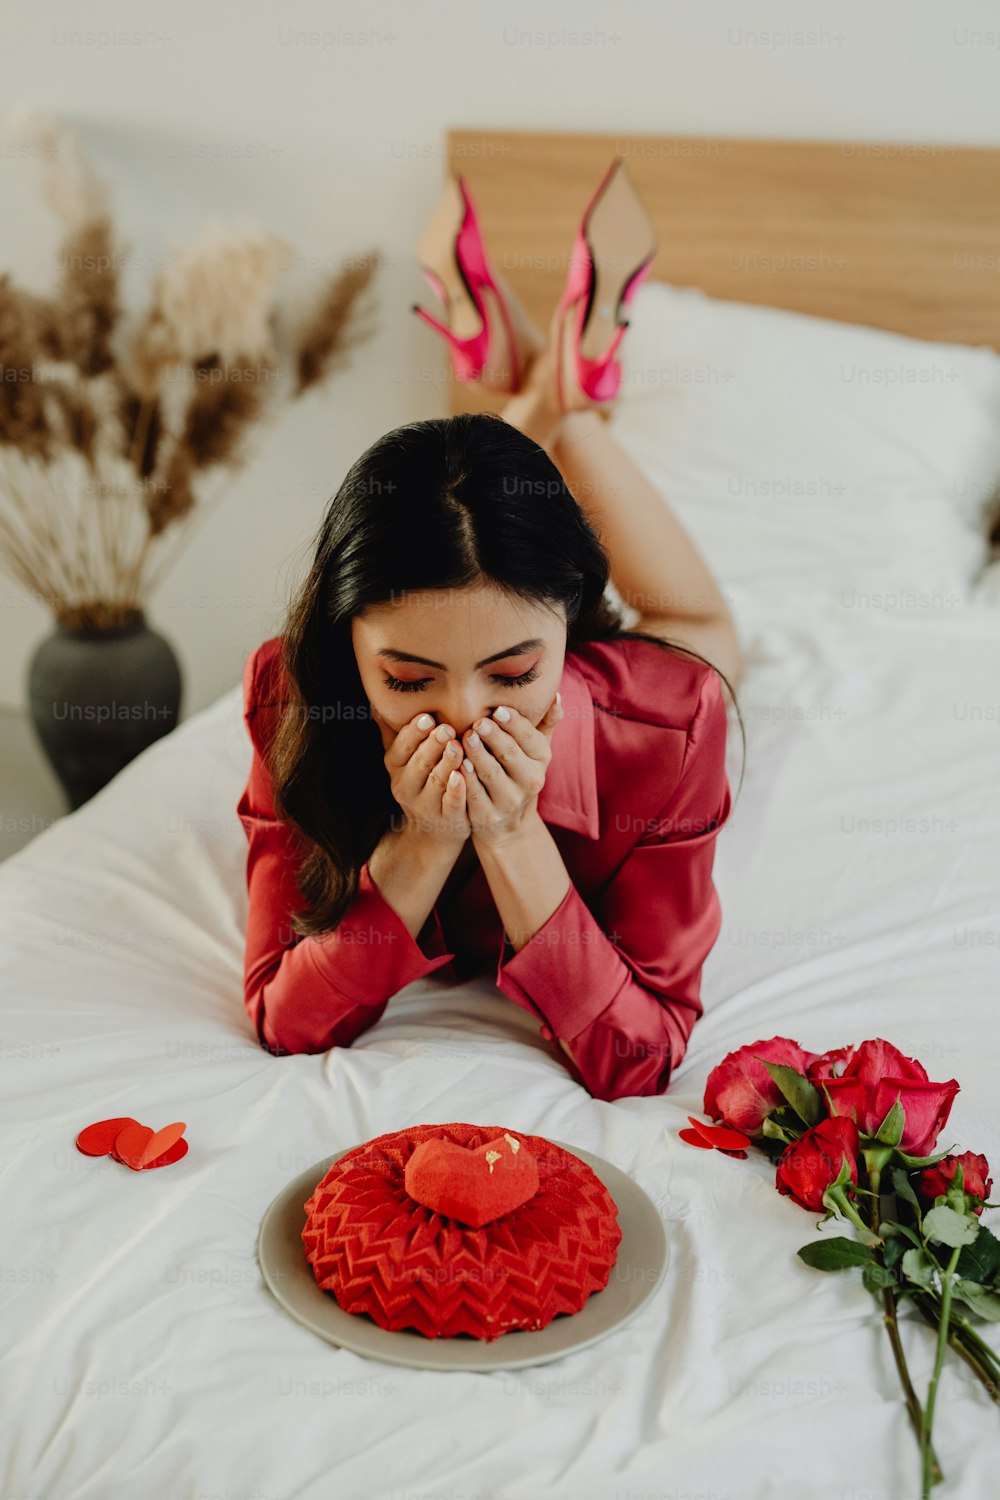 a woman laying on a bed next to a heart shaped cake